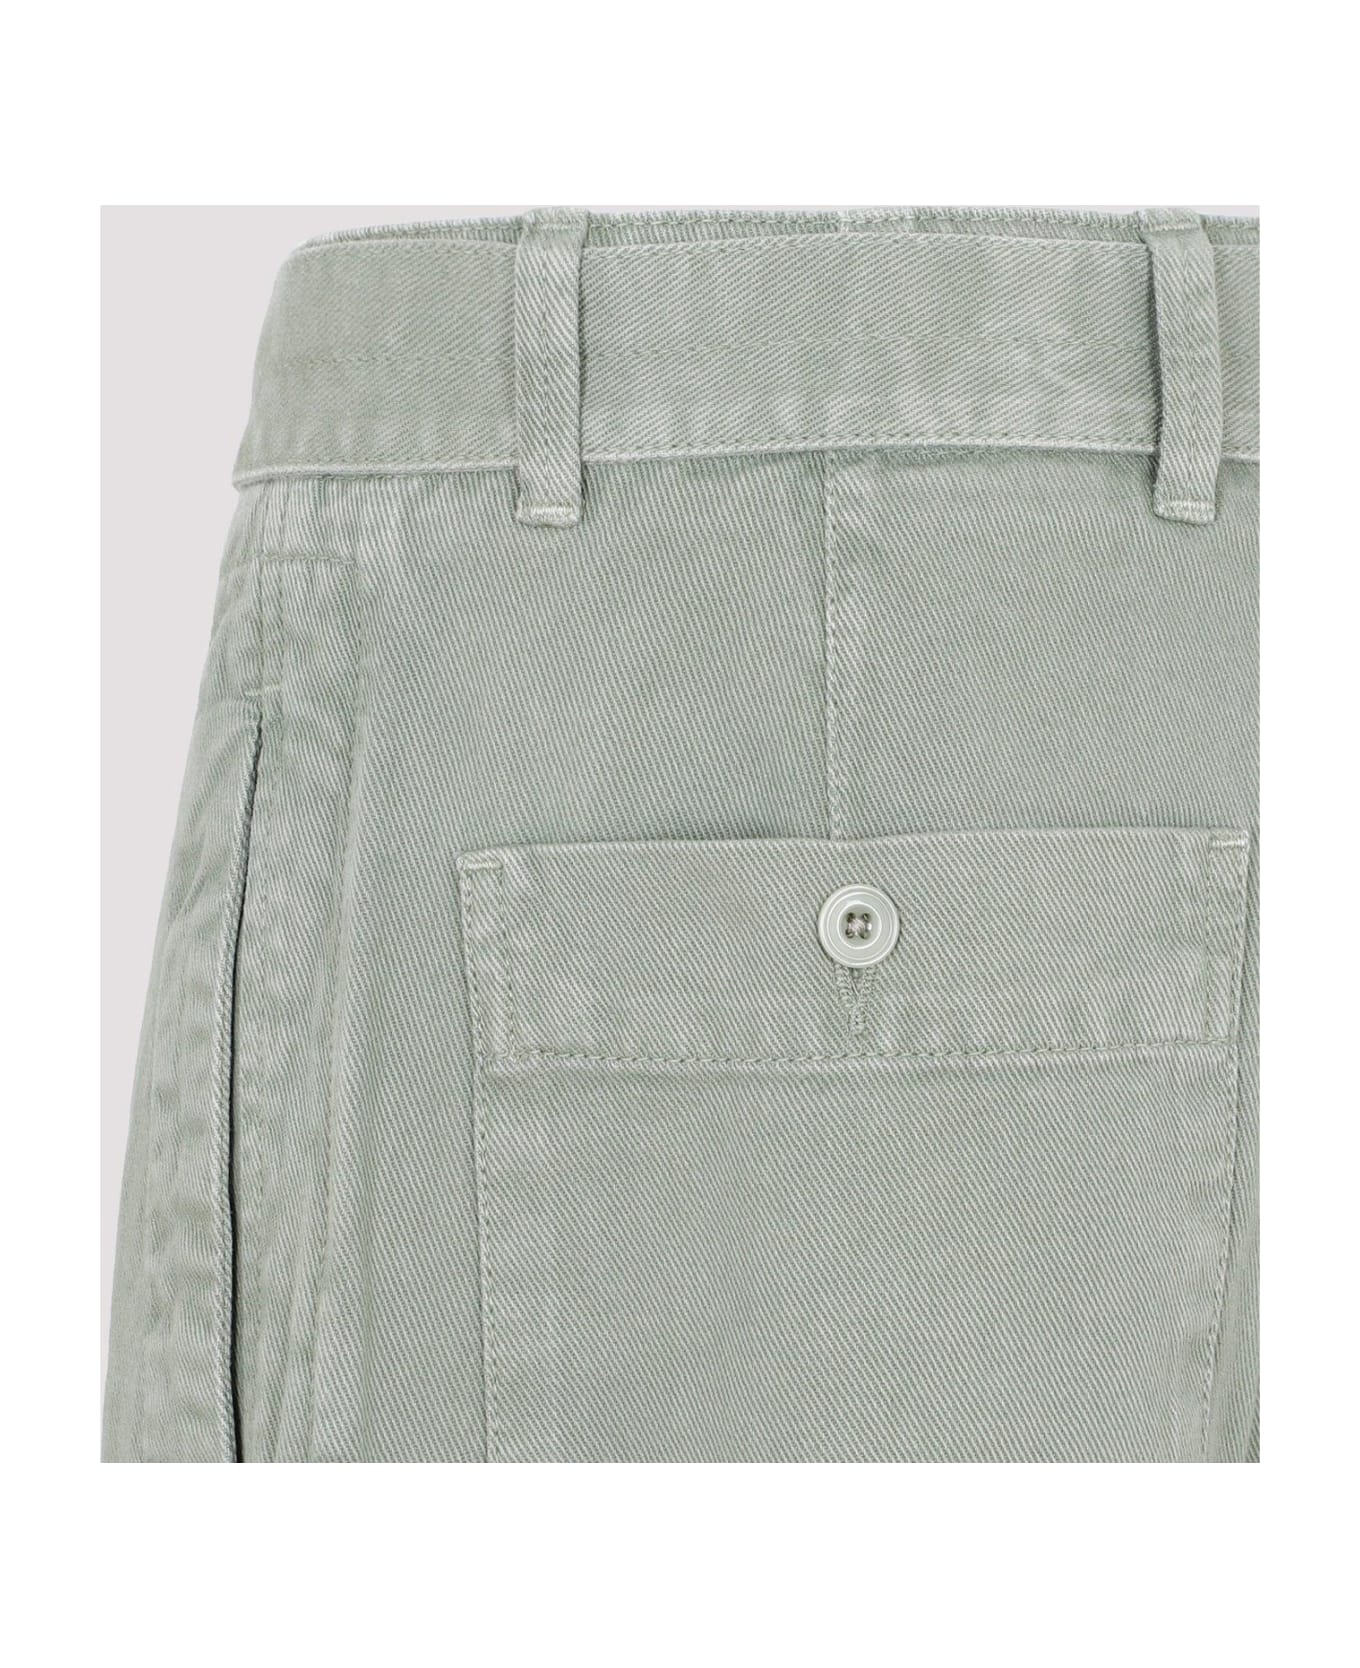 Lemaire Mllitary Pants - Hedge Green name:467